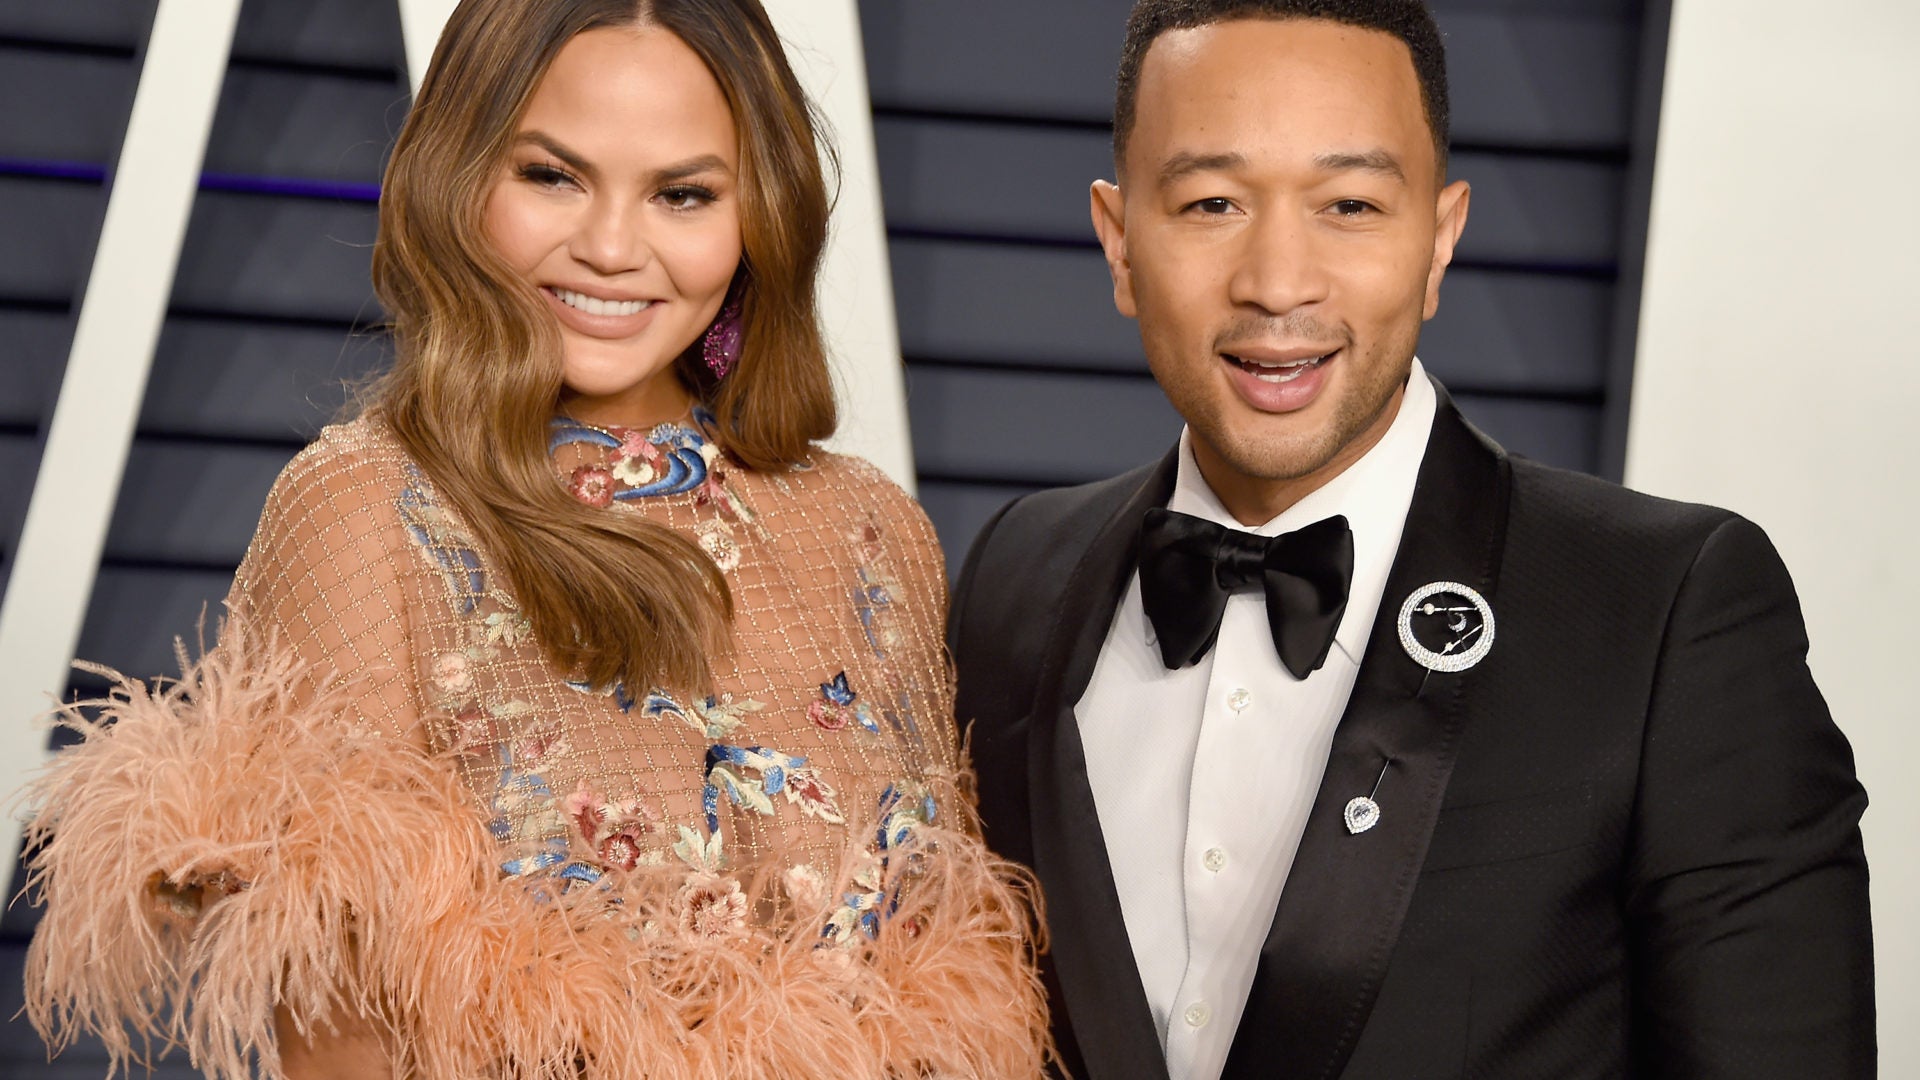 John Legend Was Named 'Sexiest Man Alive' and Chrissy Teigen Has Jokes For Days